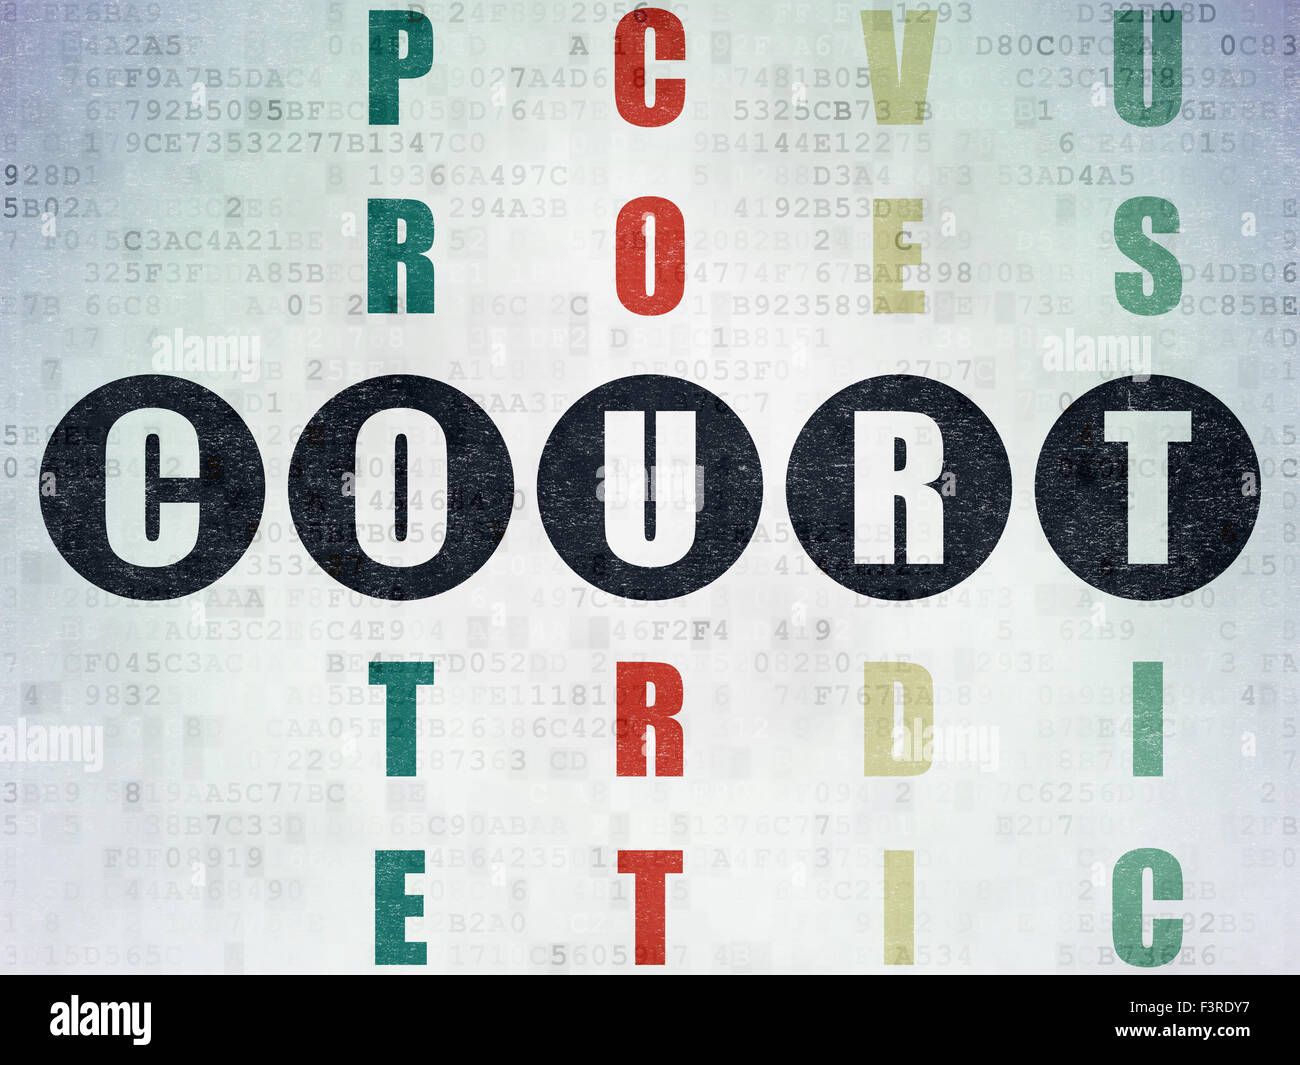 Law concept: Court in Crossword Puzzle Stock Photo Alamy